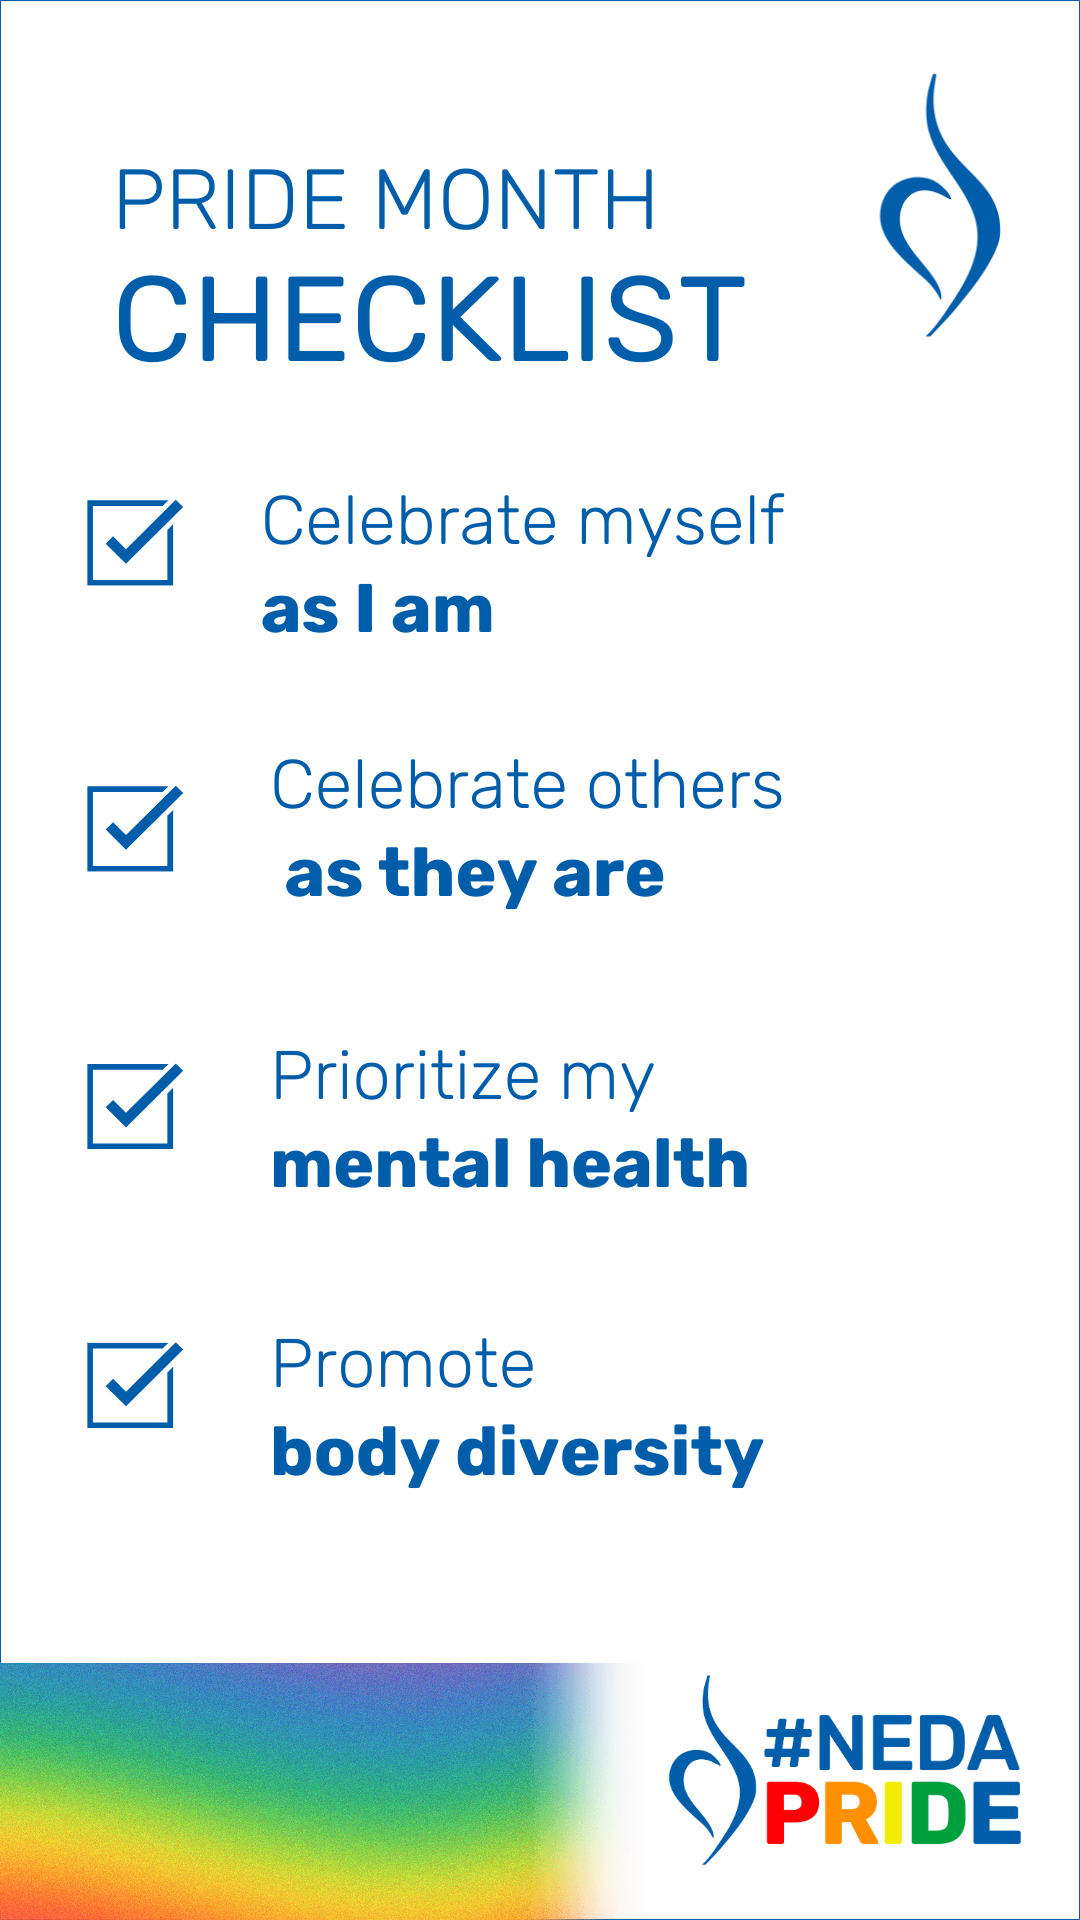 pride month checklist - celebrate myself as I am, clebrate others as they are, prioritize mental health, promote body diversity please click to download